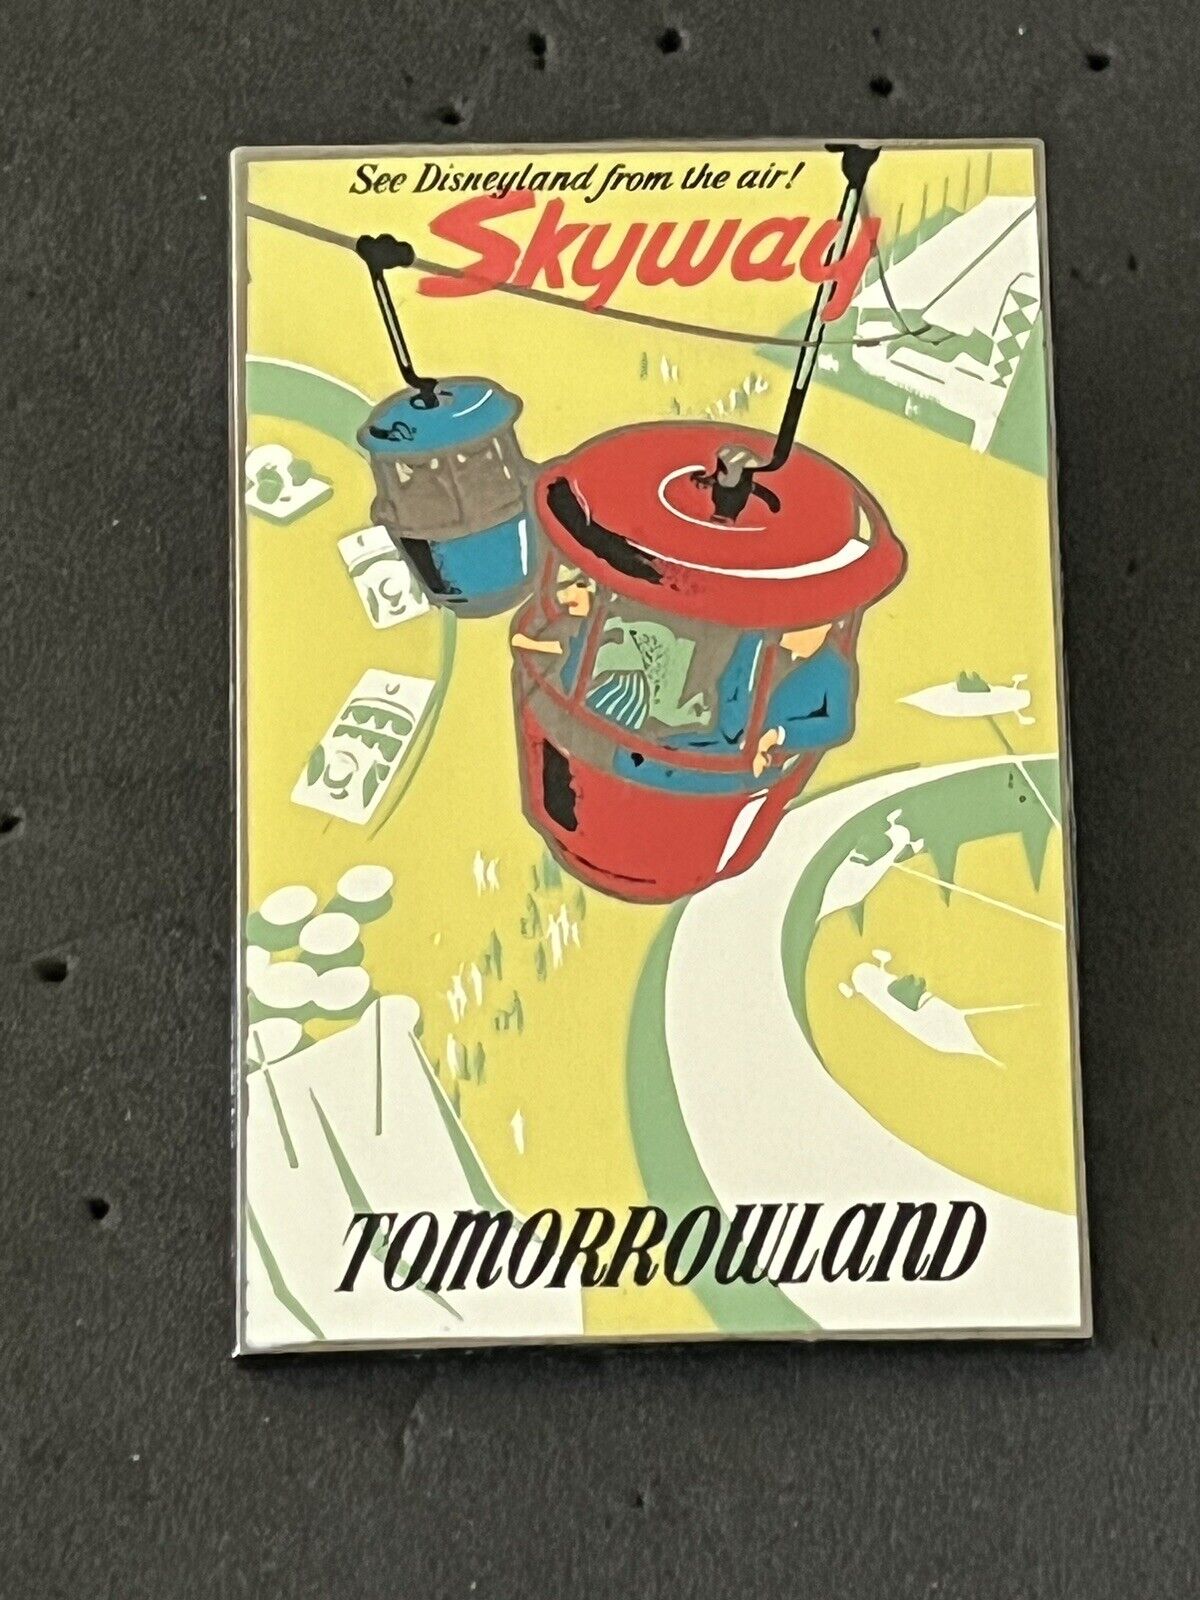 Skyway Tomorrowland Framed Attraction Poster DLR LE 1500 Disney Pin 27589